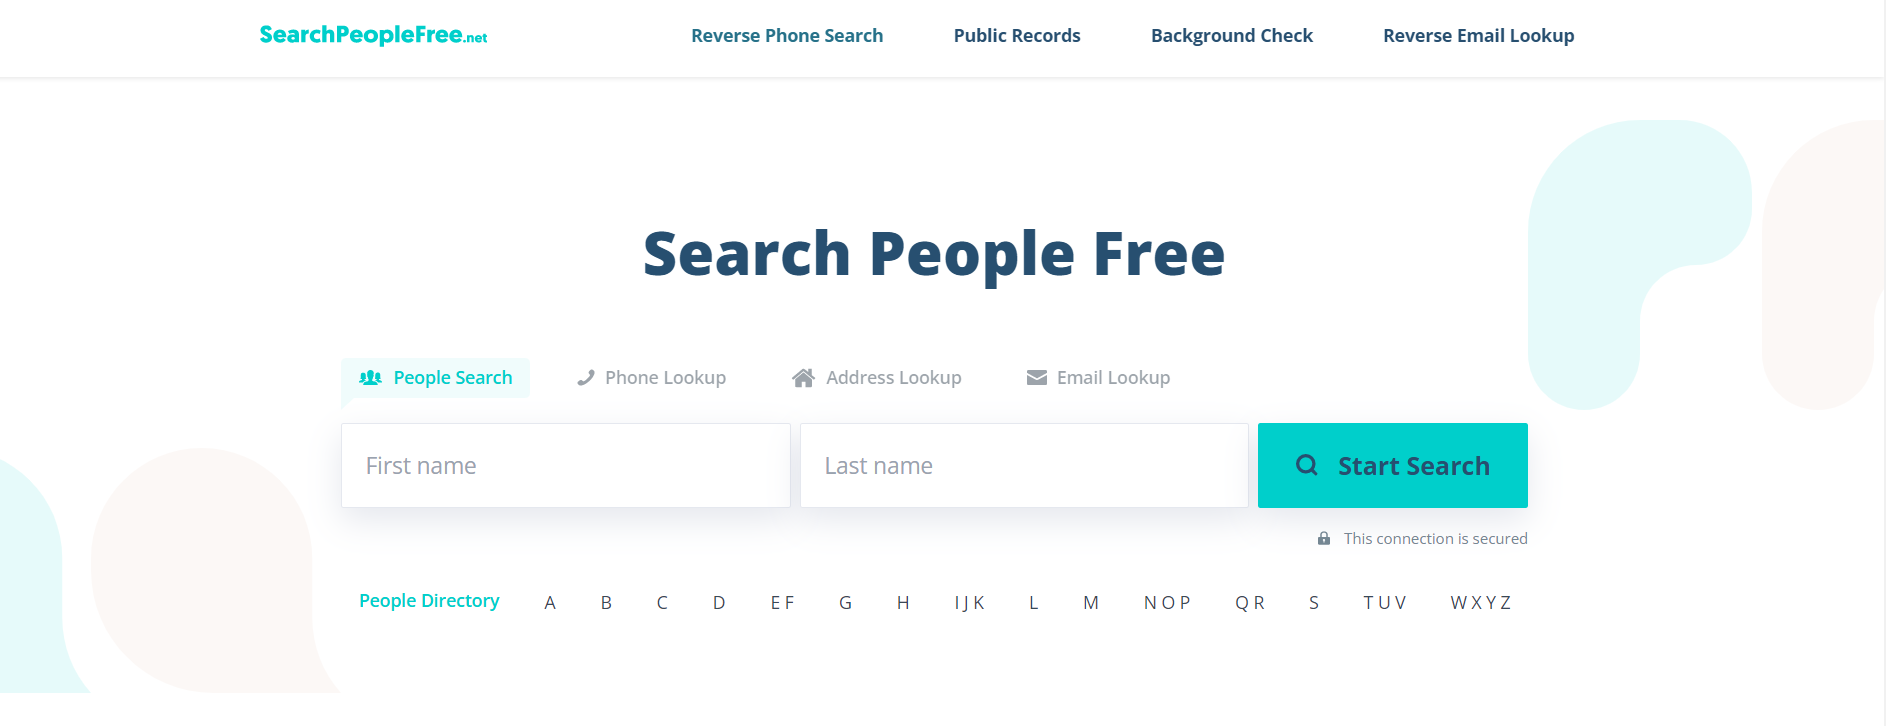 SearchPeopleFree Review